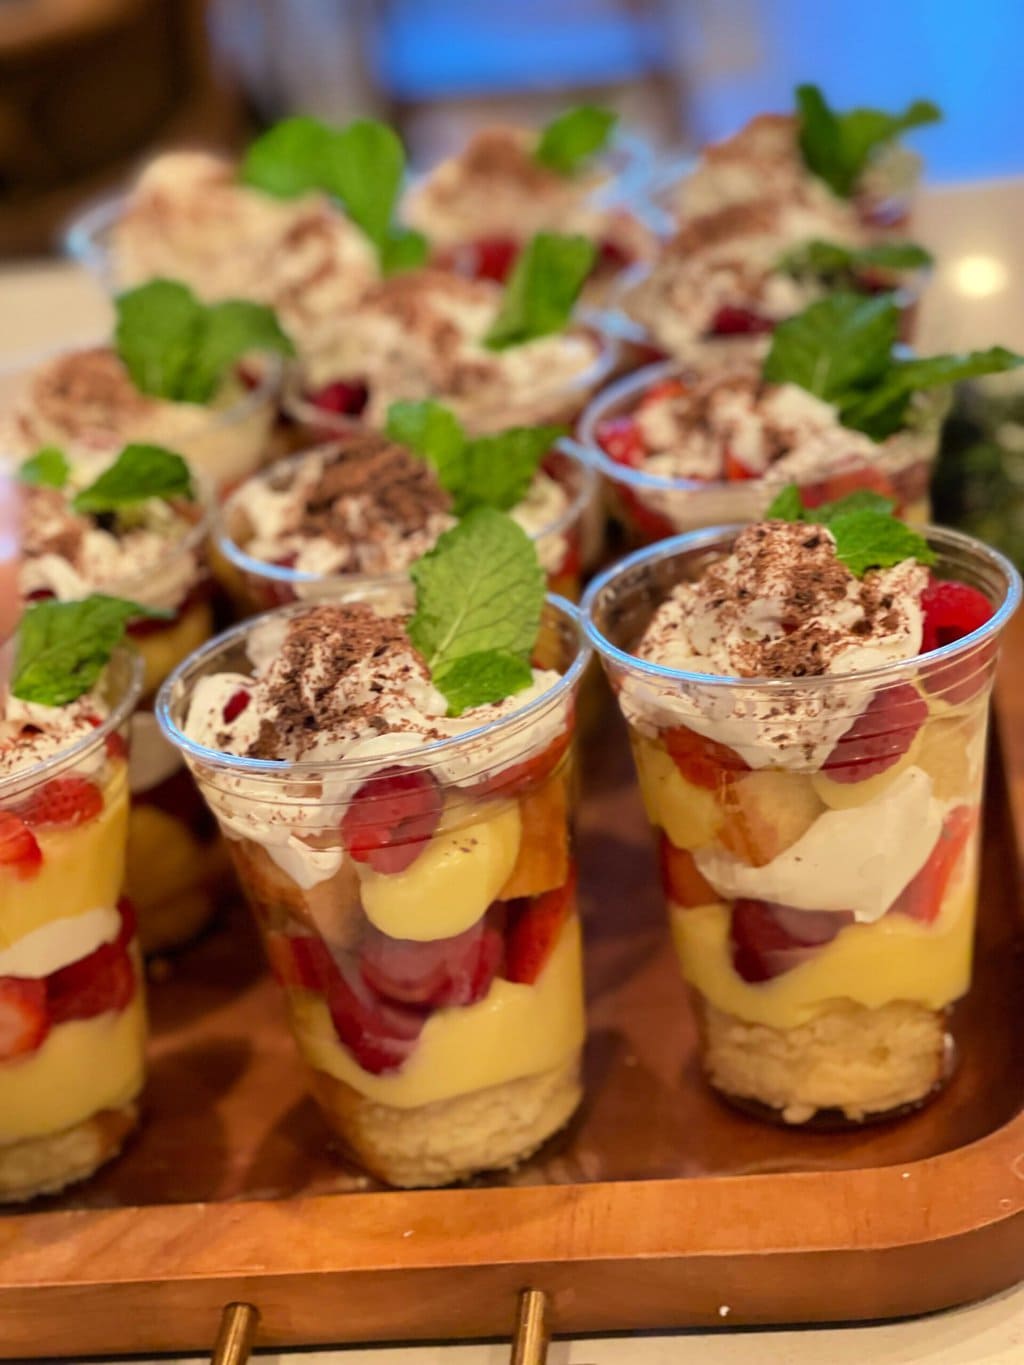 Individual Trifle Desserts with Pound Cake, Pudding, Berries and Whipped Cream topped with a Mint Leaf